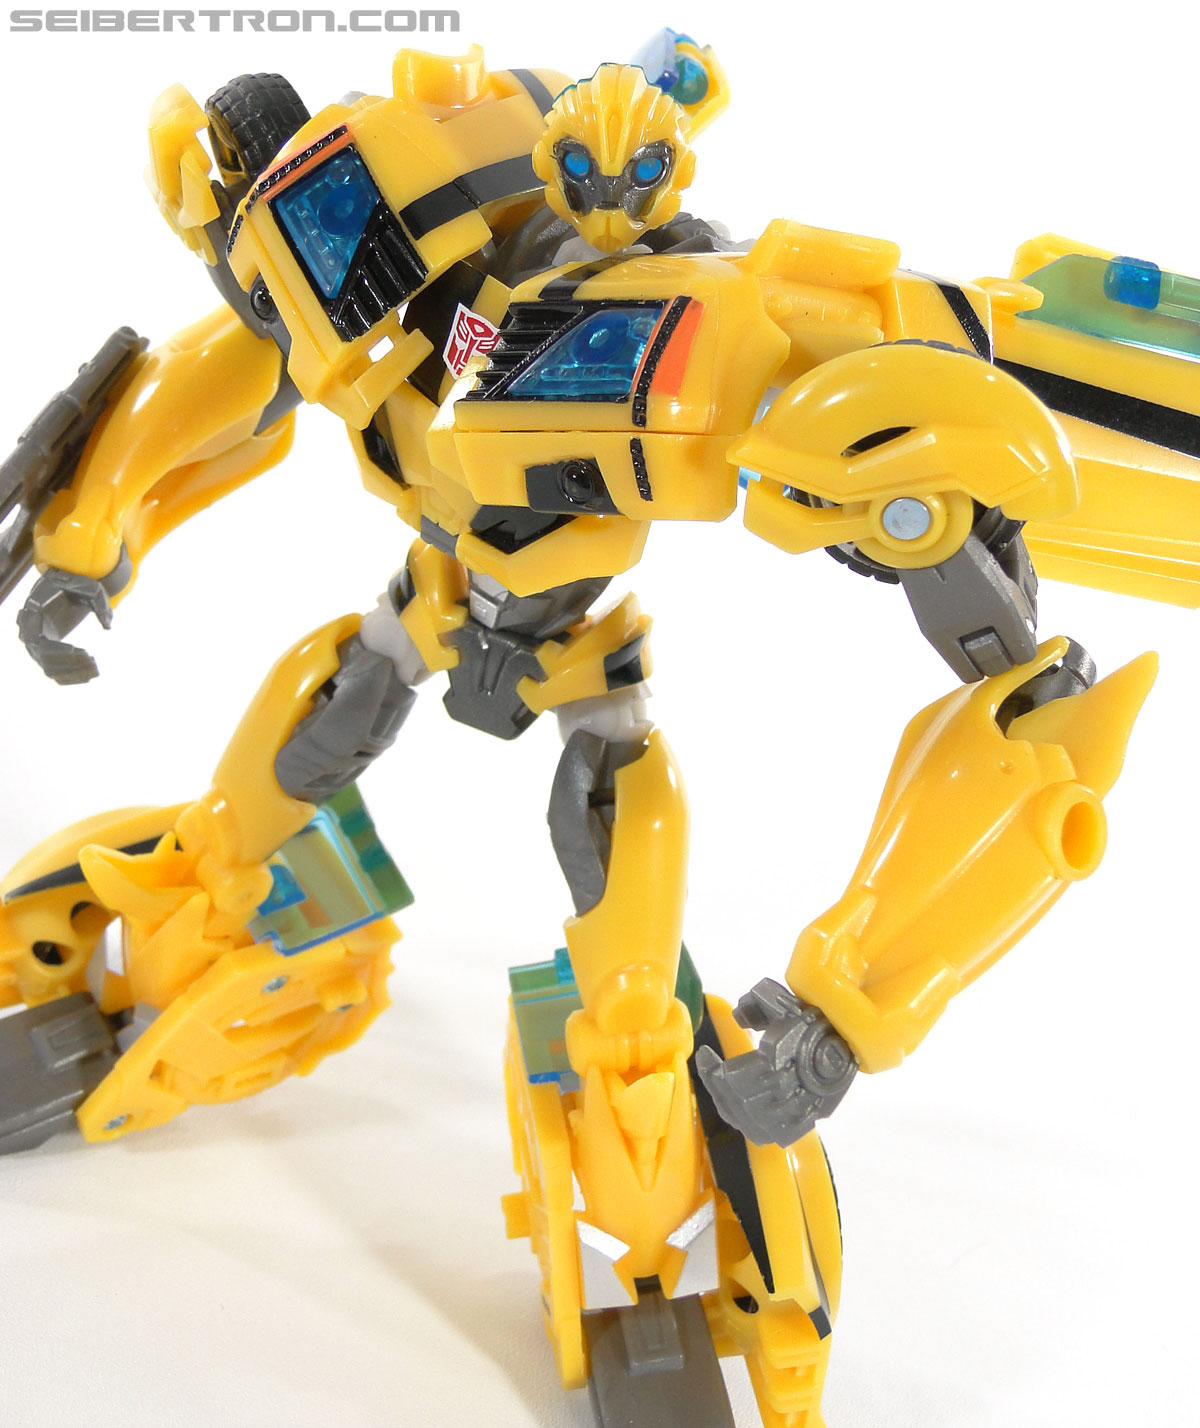 Transformers Prime: First Edition Bumblebee (Image #89 of 130)